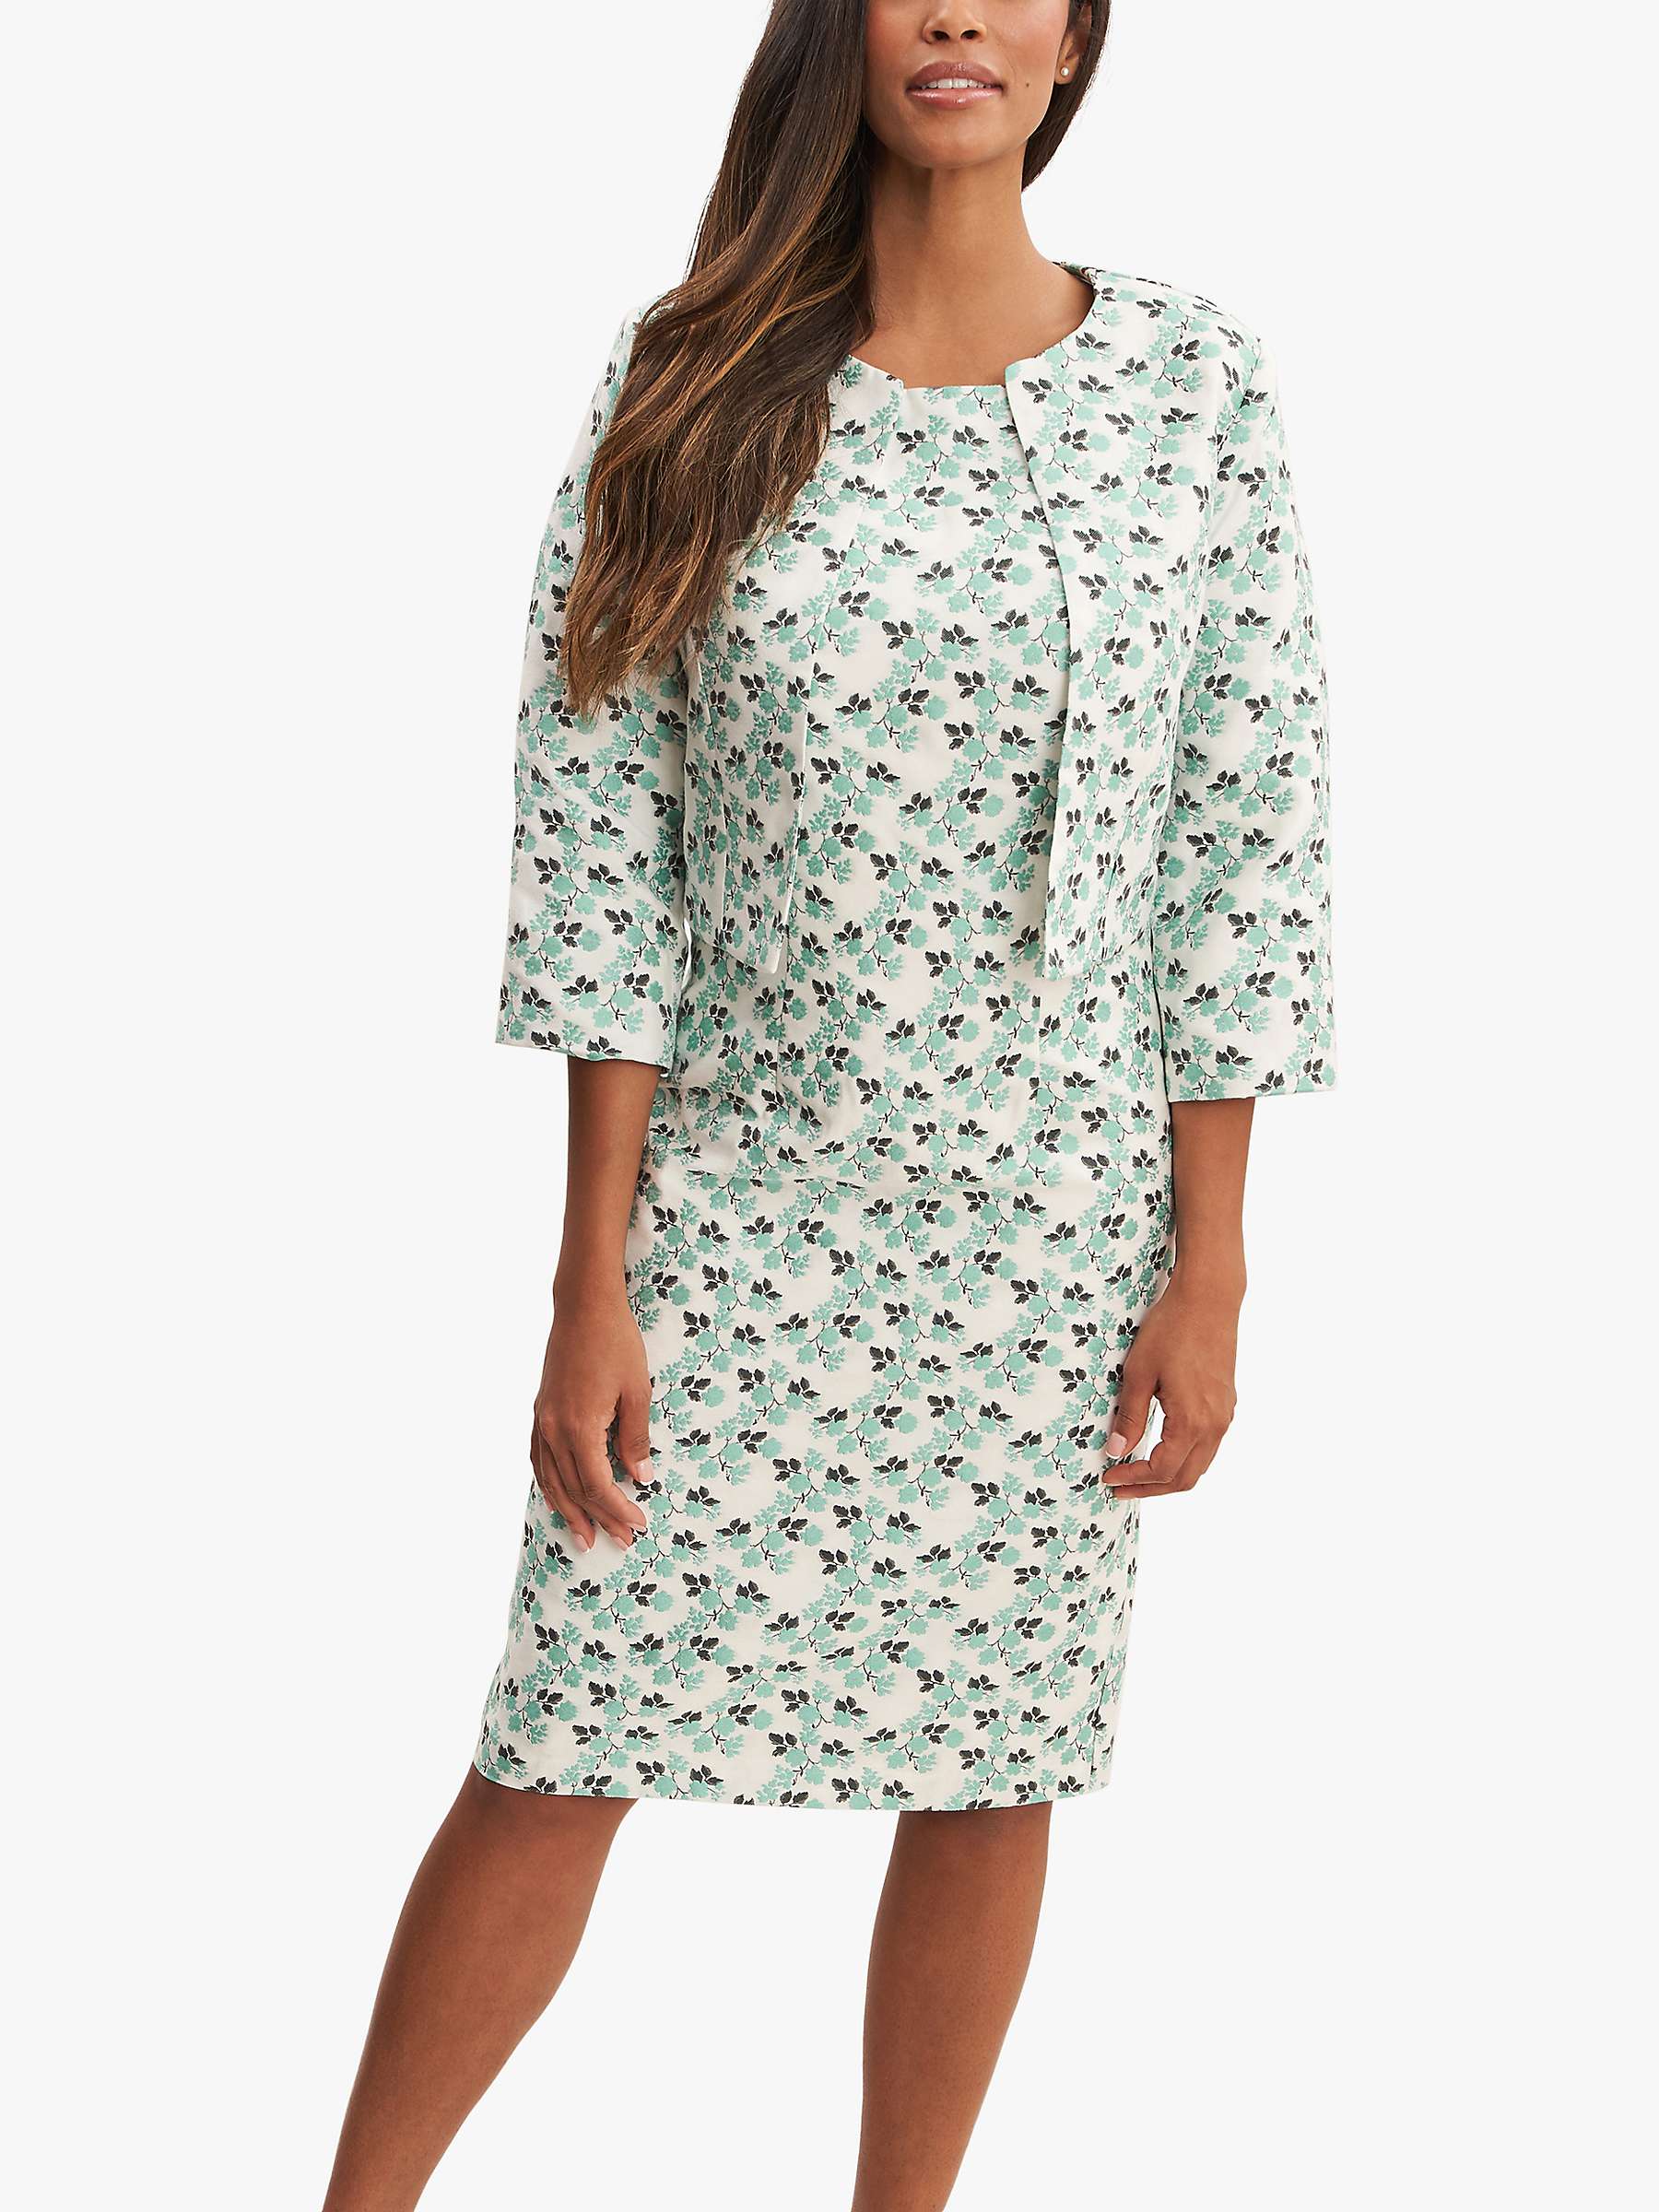 Buy Gina Bacconi Isannah Floral Jacquard Dress with Jacket, Mint/Multi Online at johnlewis.com